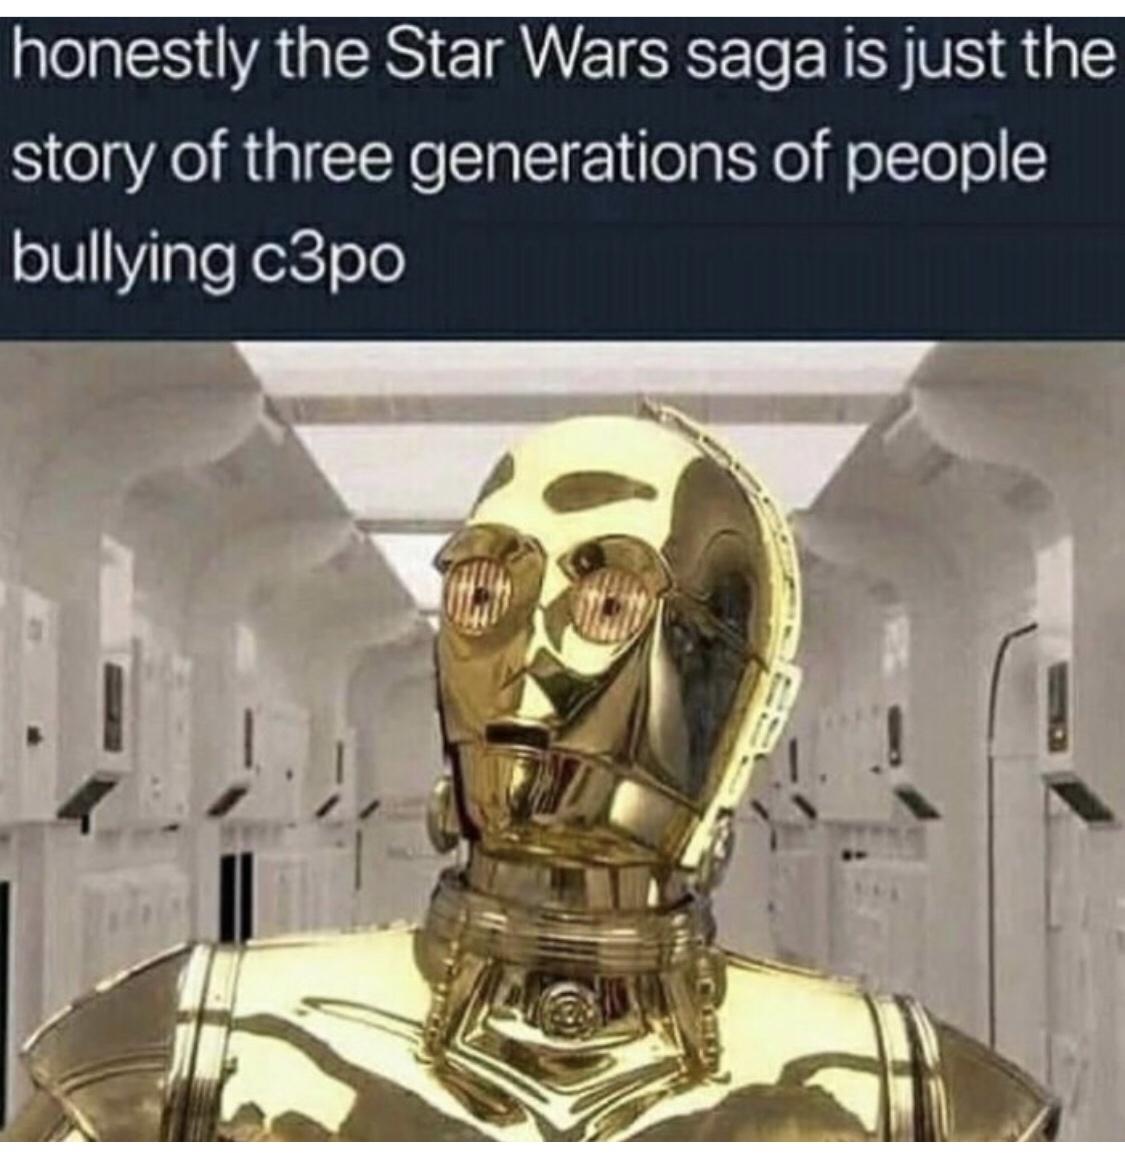 daily dose of randoms - c 3po - honestly the Star Wars saga is just the generations of people story of three bullying c3po